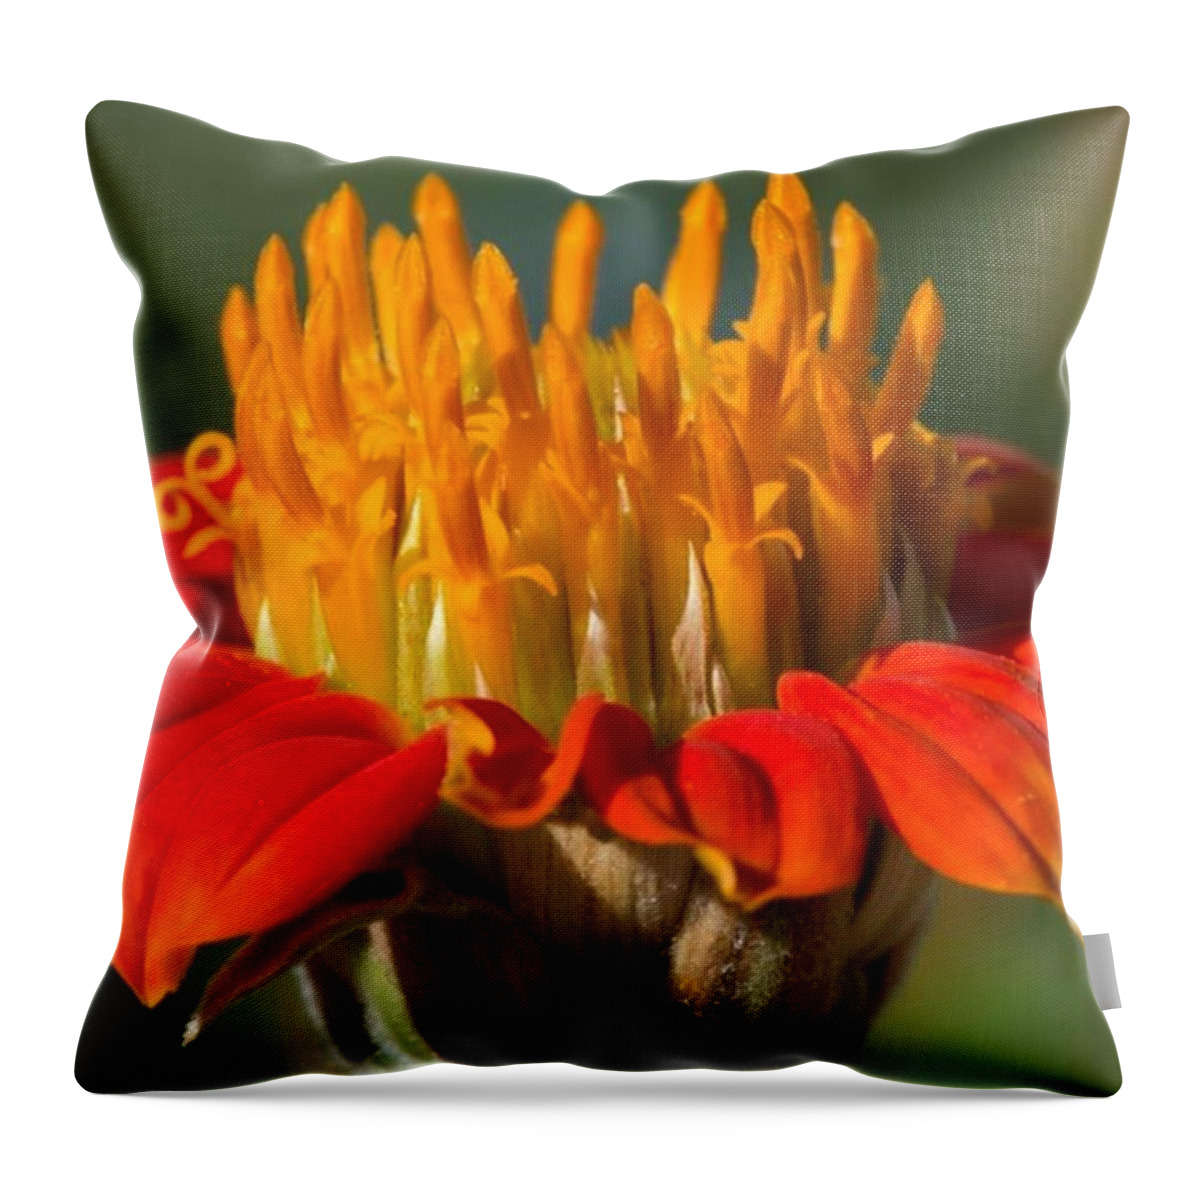 Plant Throw Pillow featuring the photograph Close Up Flower Macro by Michael Moriarty